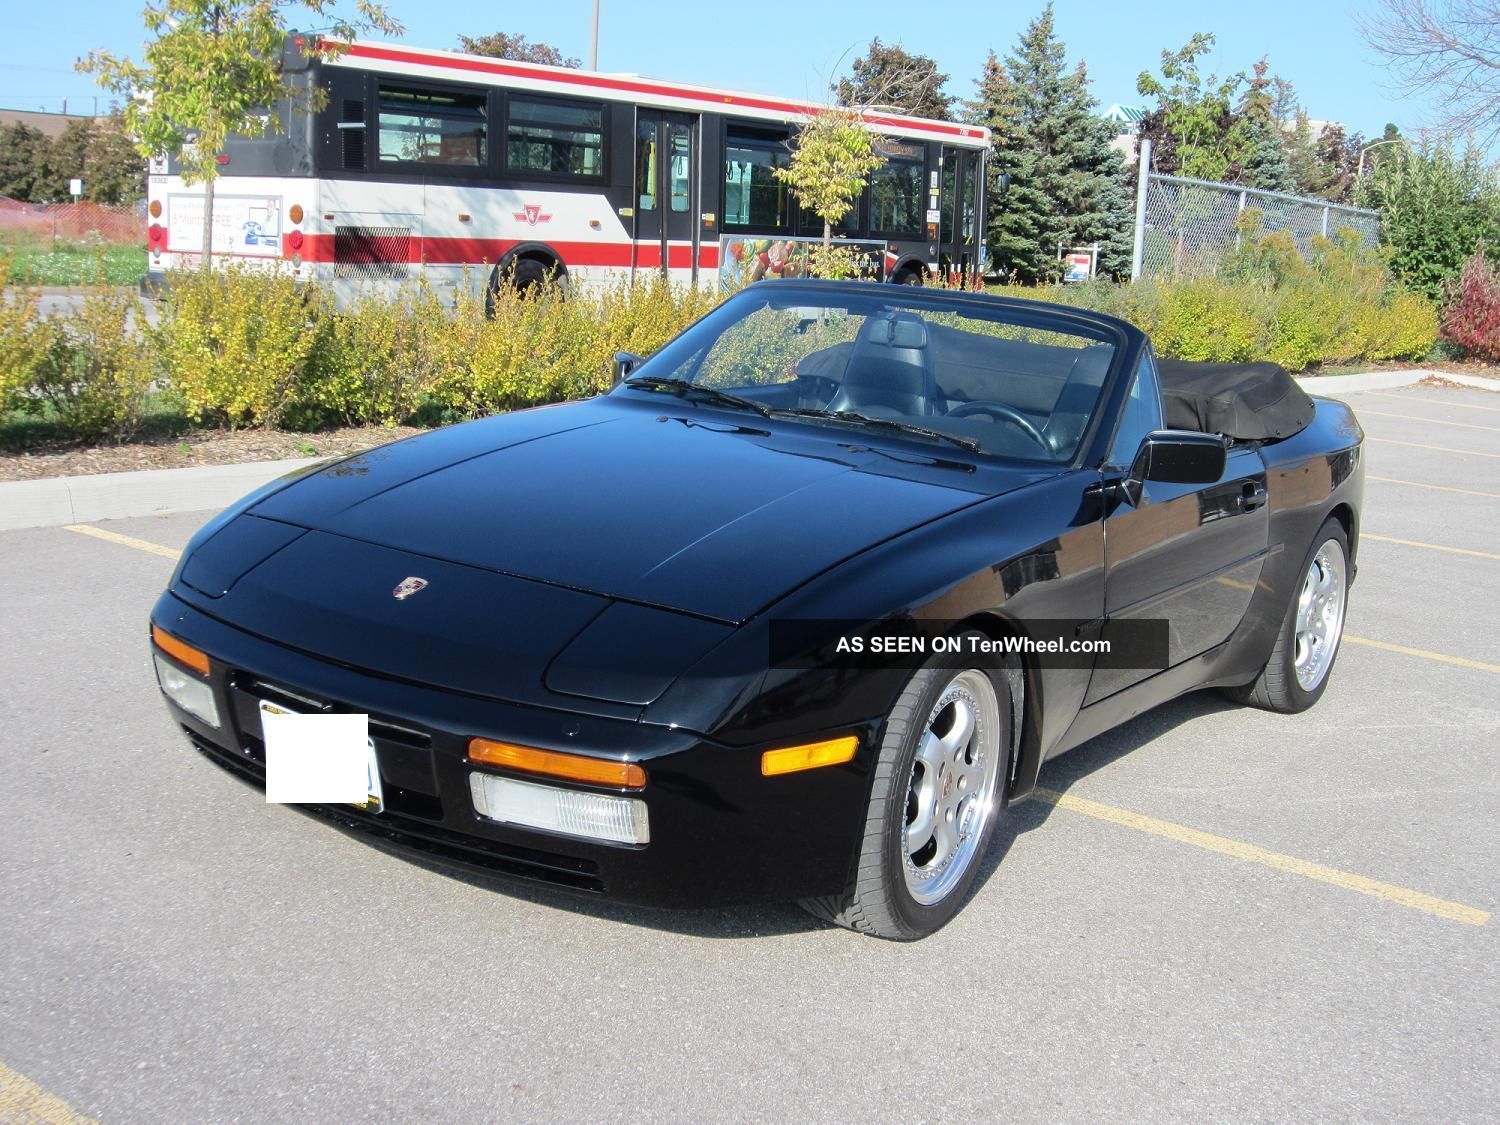 1990 944 Convertible With Turbo Engine 269hp At Wheels 951 944 photo